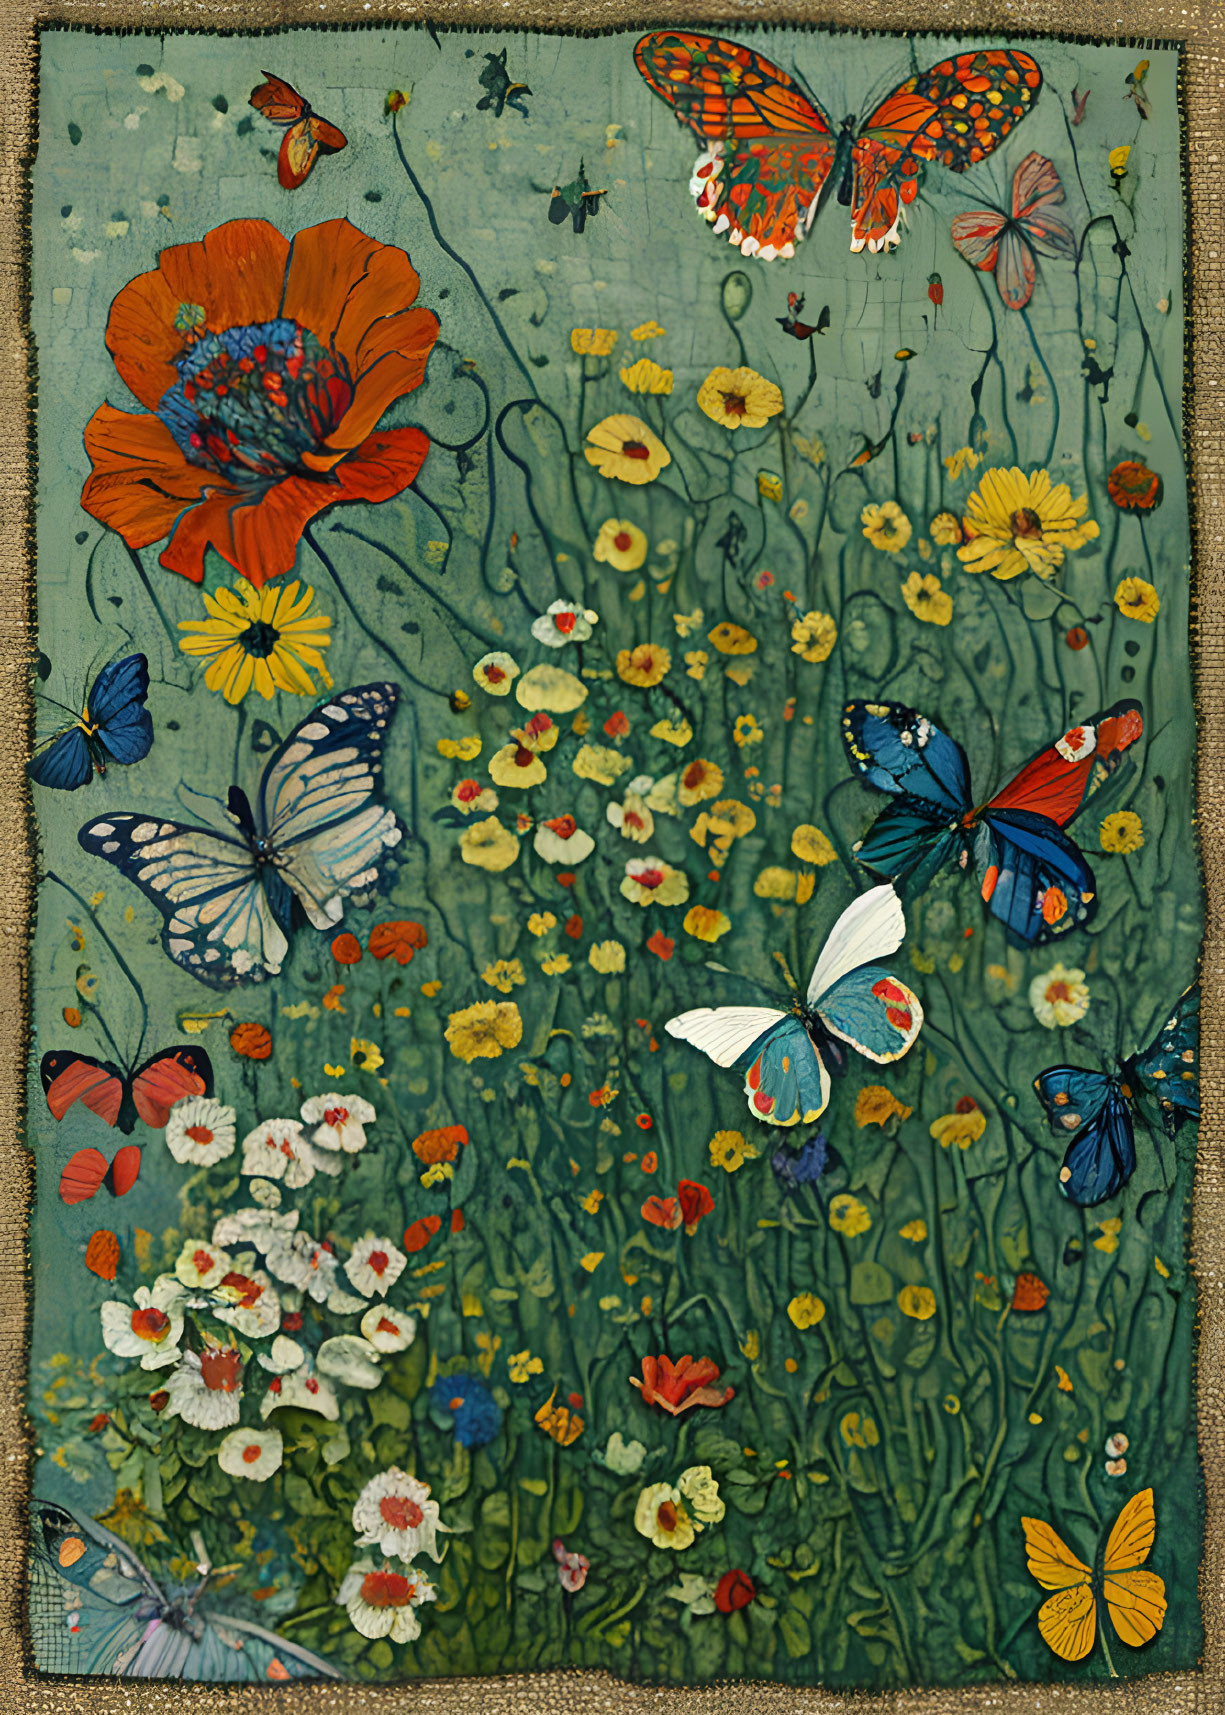 Colorful Vintage Wildflower Meadow with Butterflies on Textured Background